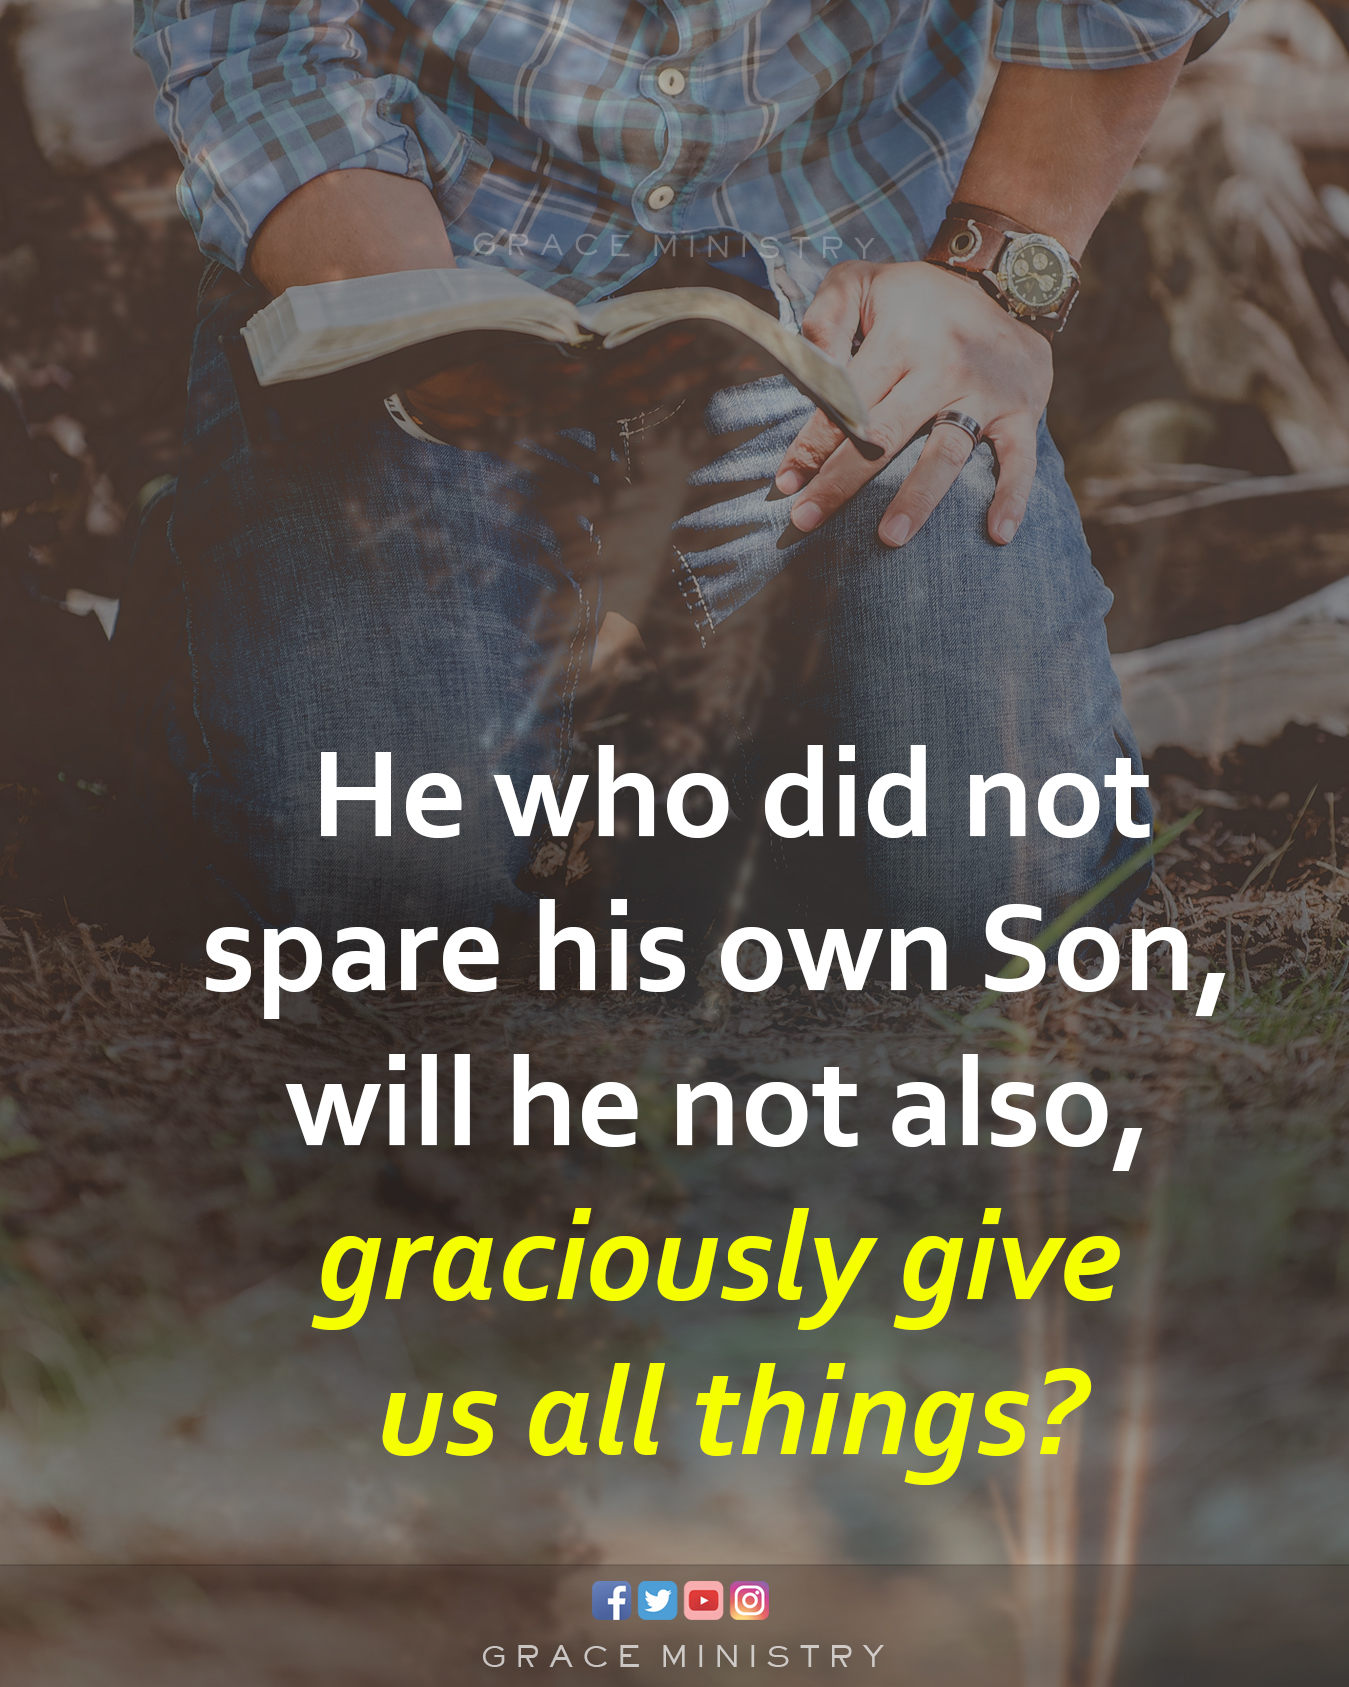 December Promise Message 2022 by Grace Ministry Bro Andrew Richard is from the book of Romans 8:32,  He who did not spare his own Son, but gave him up for us all—how will he not also, along with him, graciously give us all things?